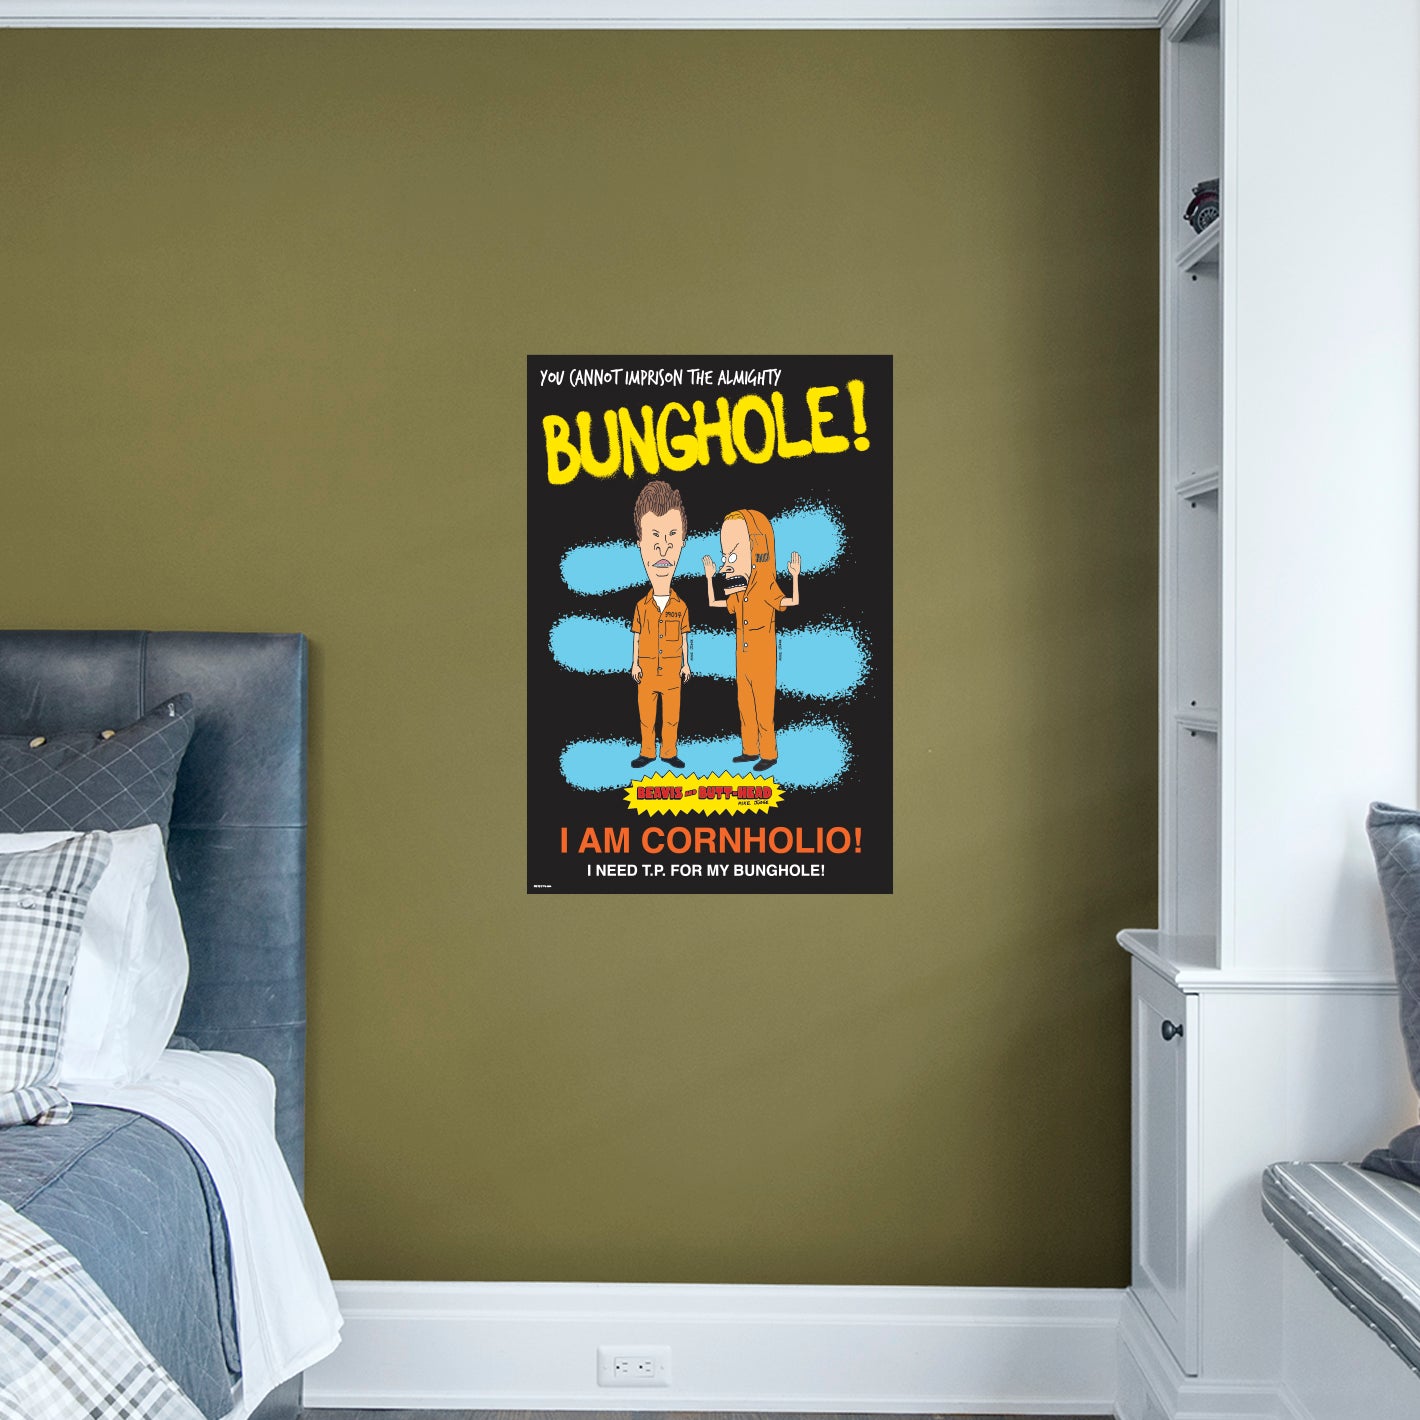 Beavis & Butt-Head: Beavis & Butt-Head Cornholio Prison Poster - Officially Licensed Paramount Removable Adhesive Decal